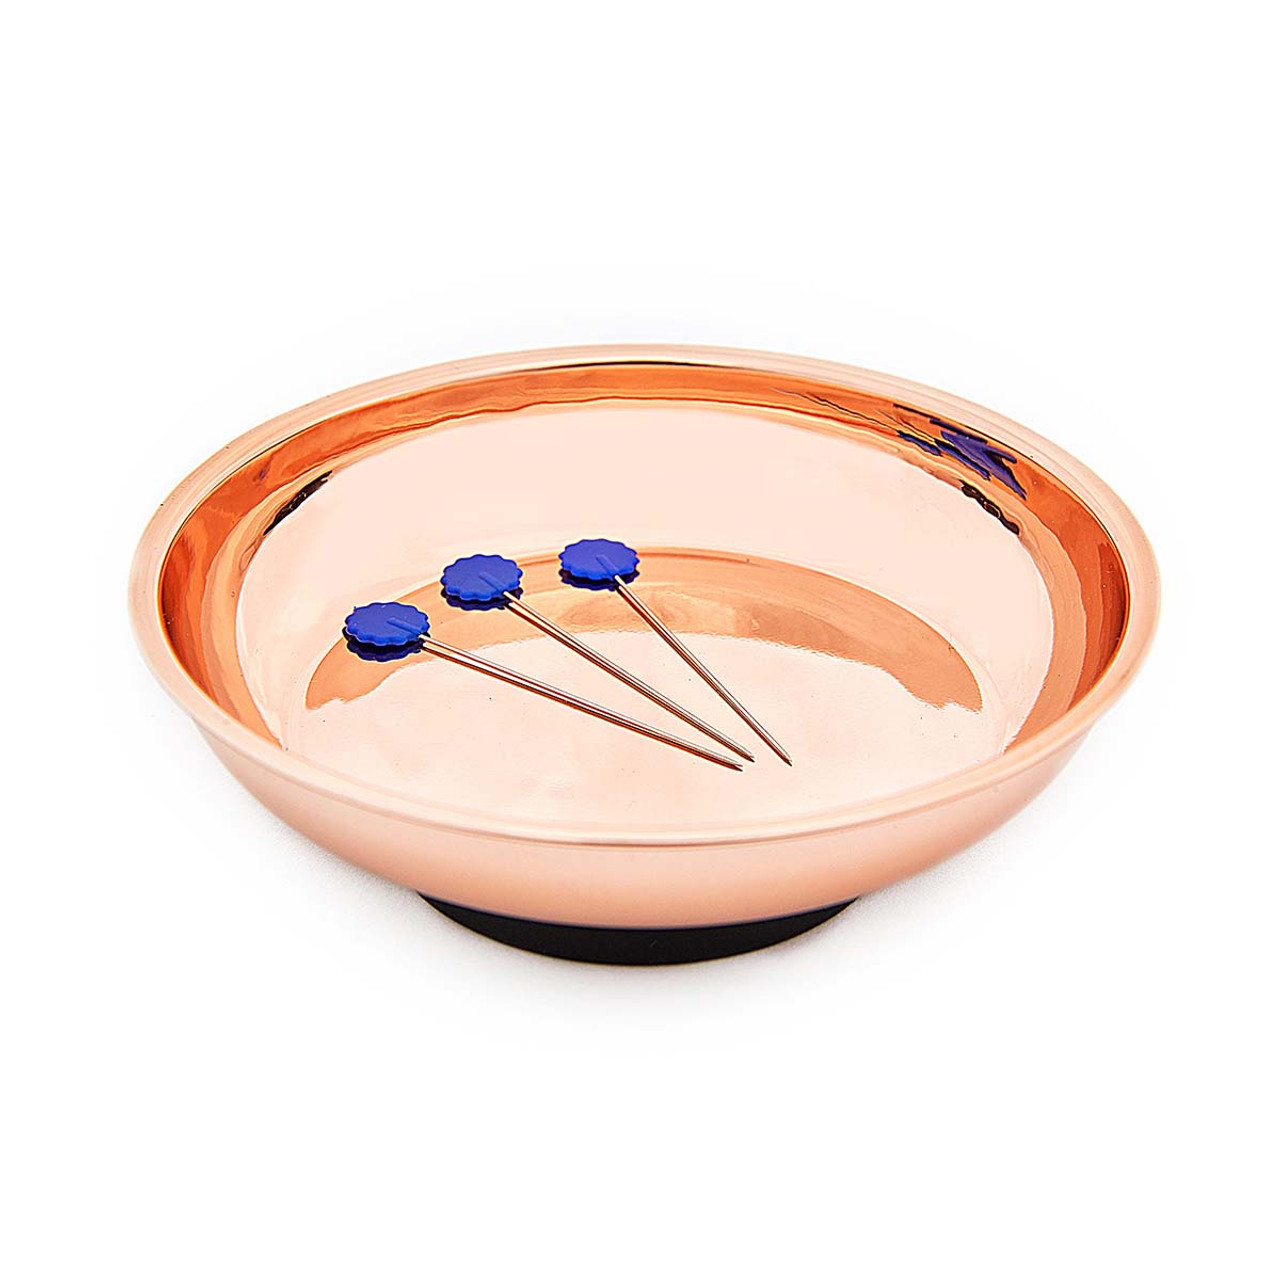 Fat Quarter Shop - This Rose Gold Magnetic Pin Dish from Tacony is perfect  for storing and accessorizing small parts, pins, needles, paper clips and  even bobby pins. Plus it's totally fabulous!